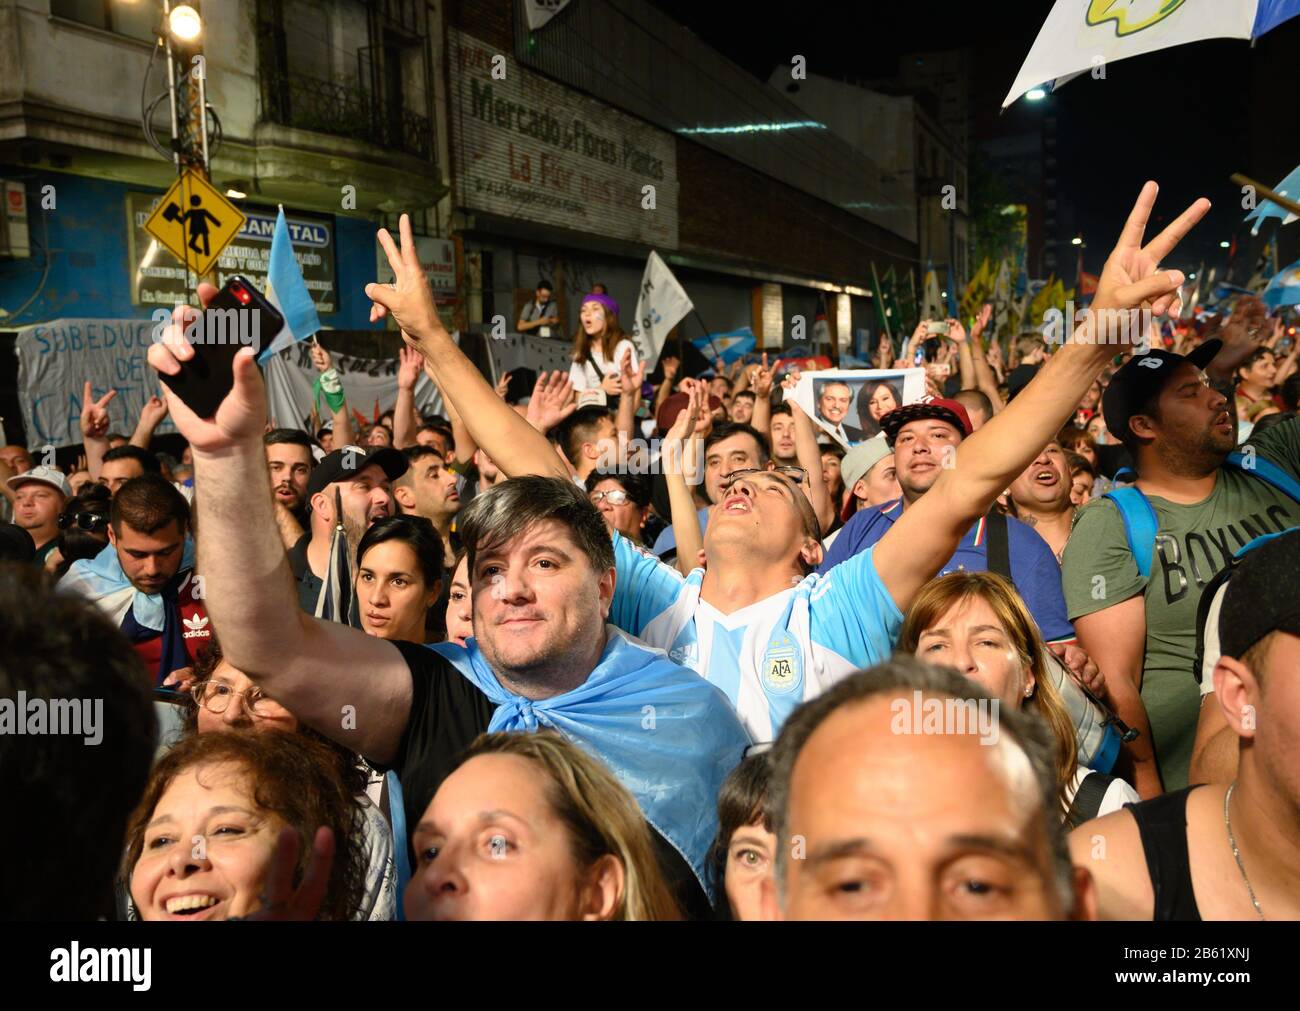 Participants in a rally of the “Frente de Todos” party alliance cheer during a speech by the presidential candidate Alberto Fernández in Buenos Aires. Opposition candidate Alberto Fernández won the presidential election in Argentina. Dawith is also returning the controversial ex-president Cristina Kirchner to the government as vice president. | usage worldwide Stock Photo